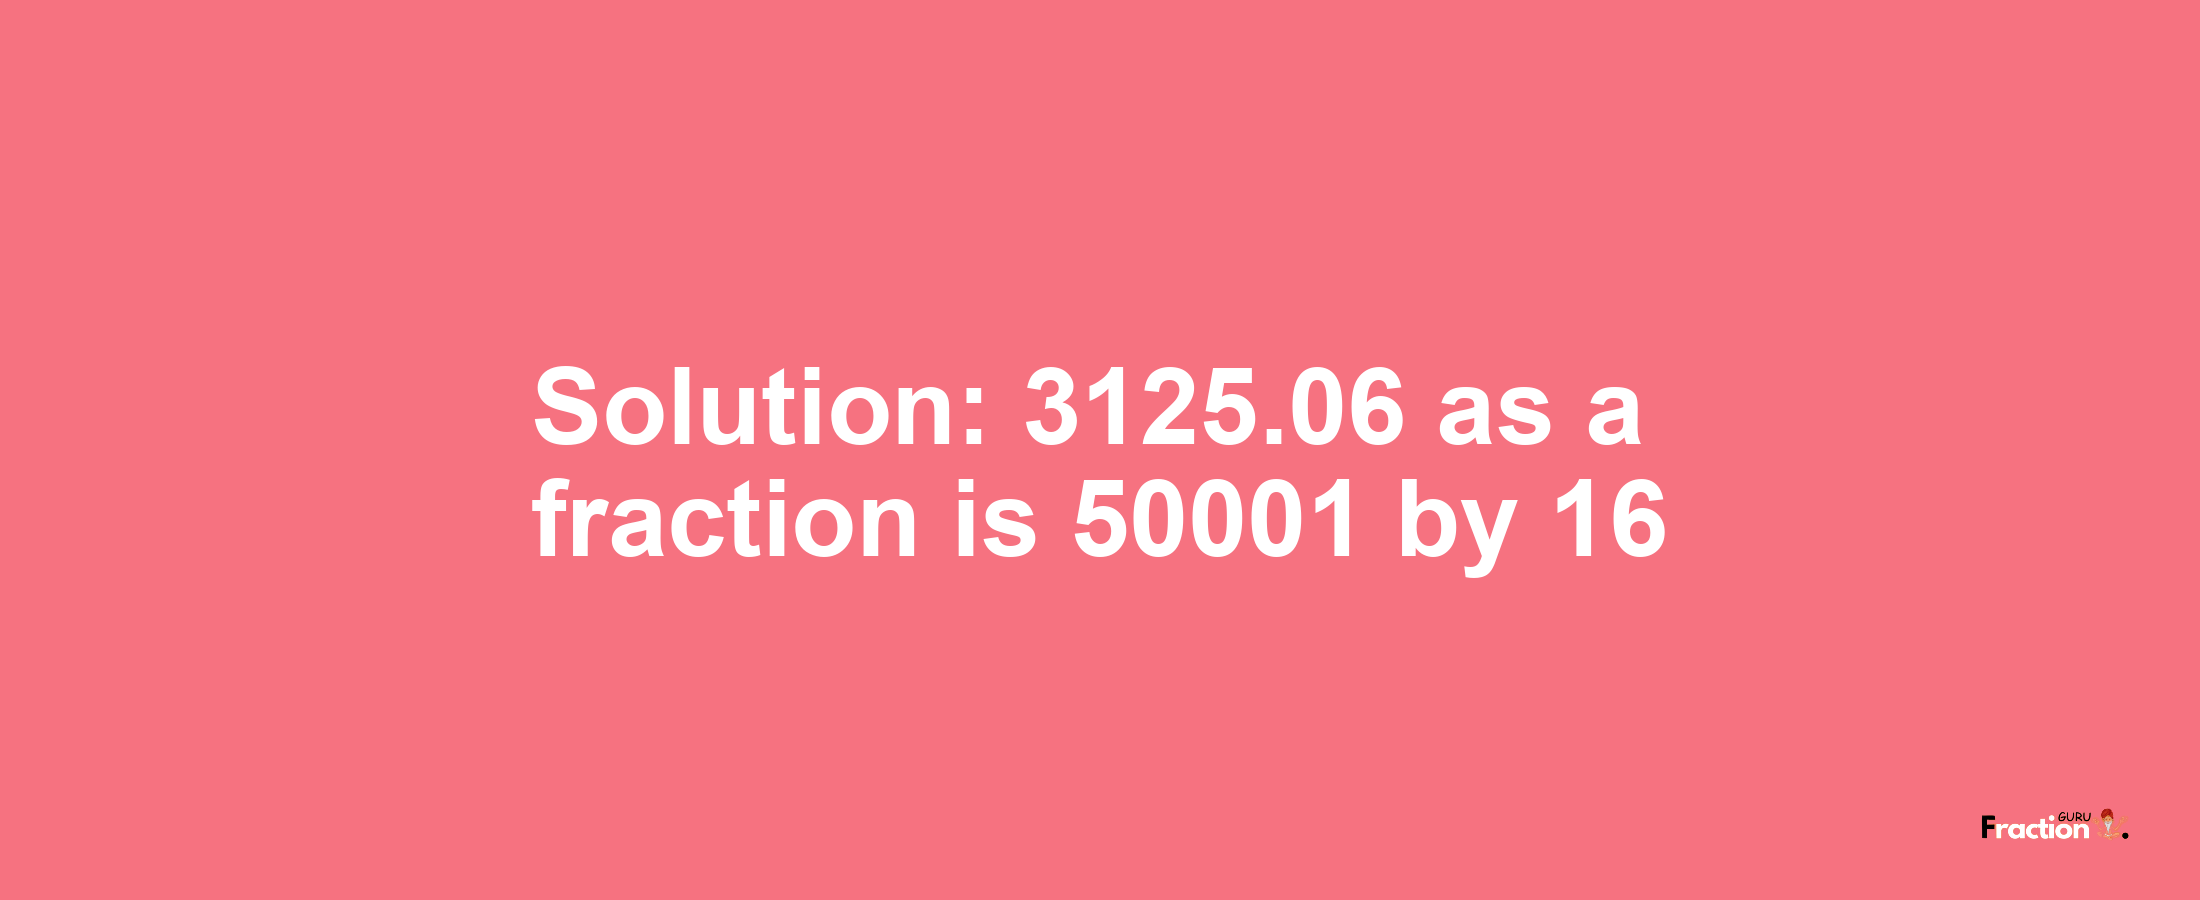 Solution:3125.06 as a fraction is 50001/16